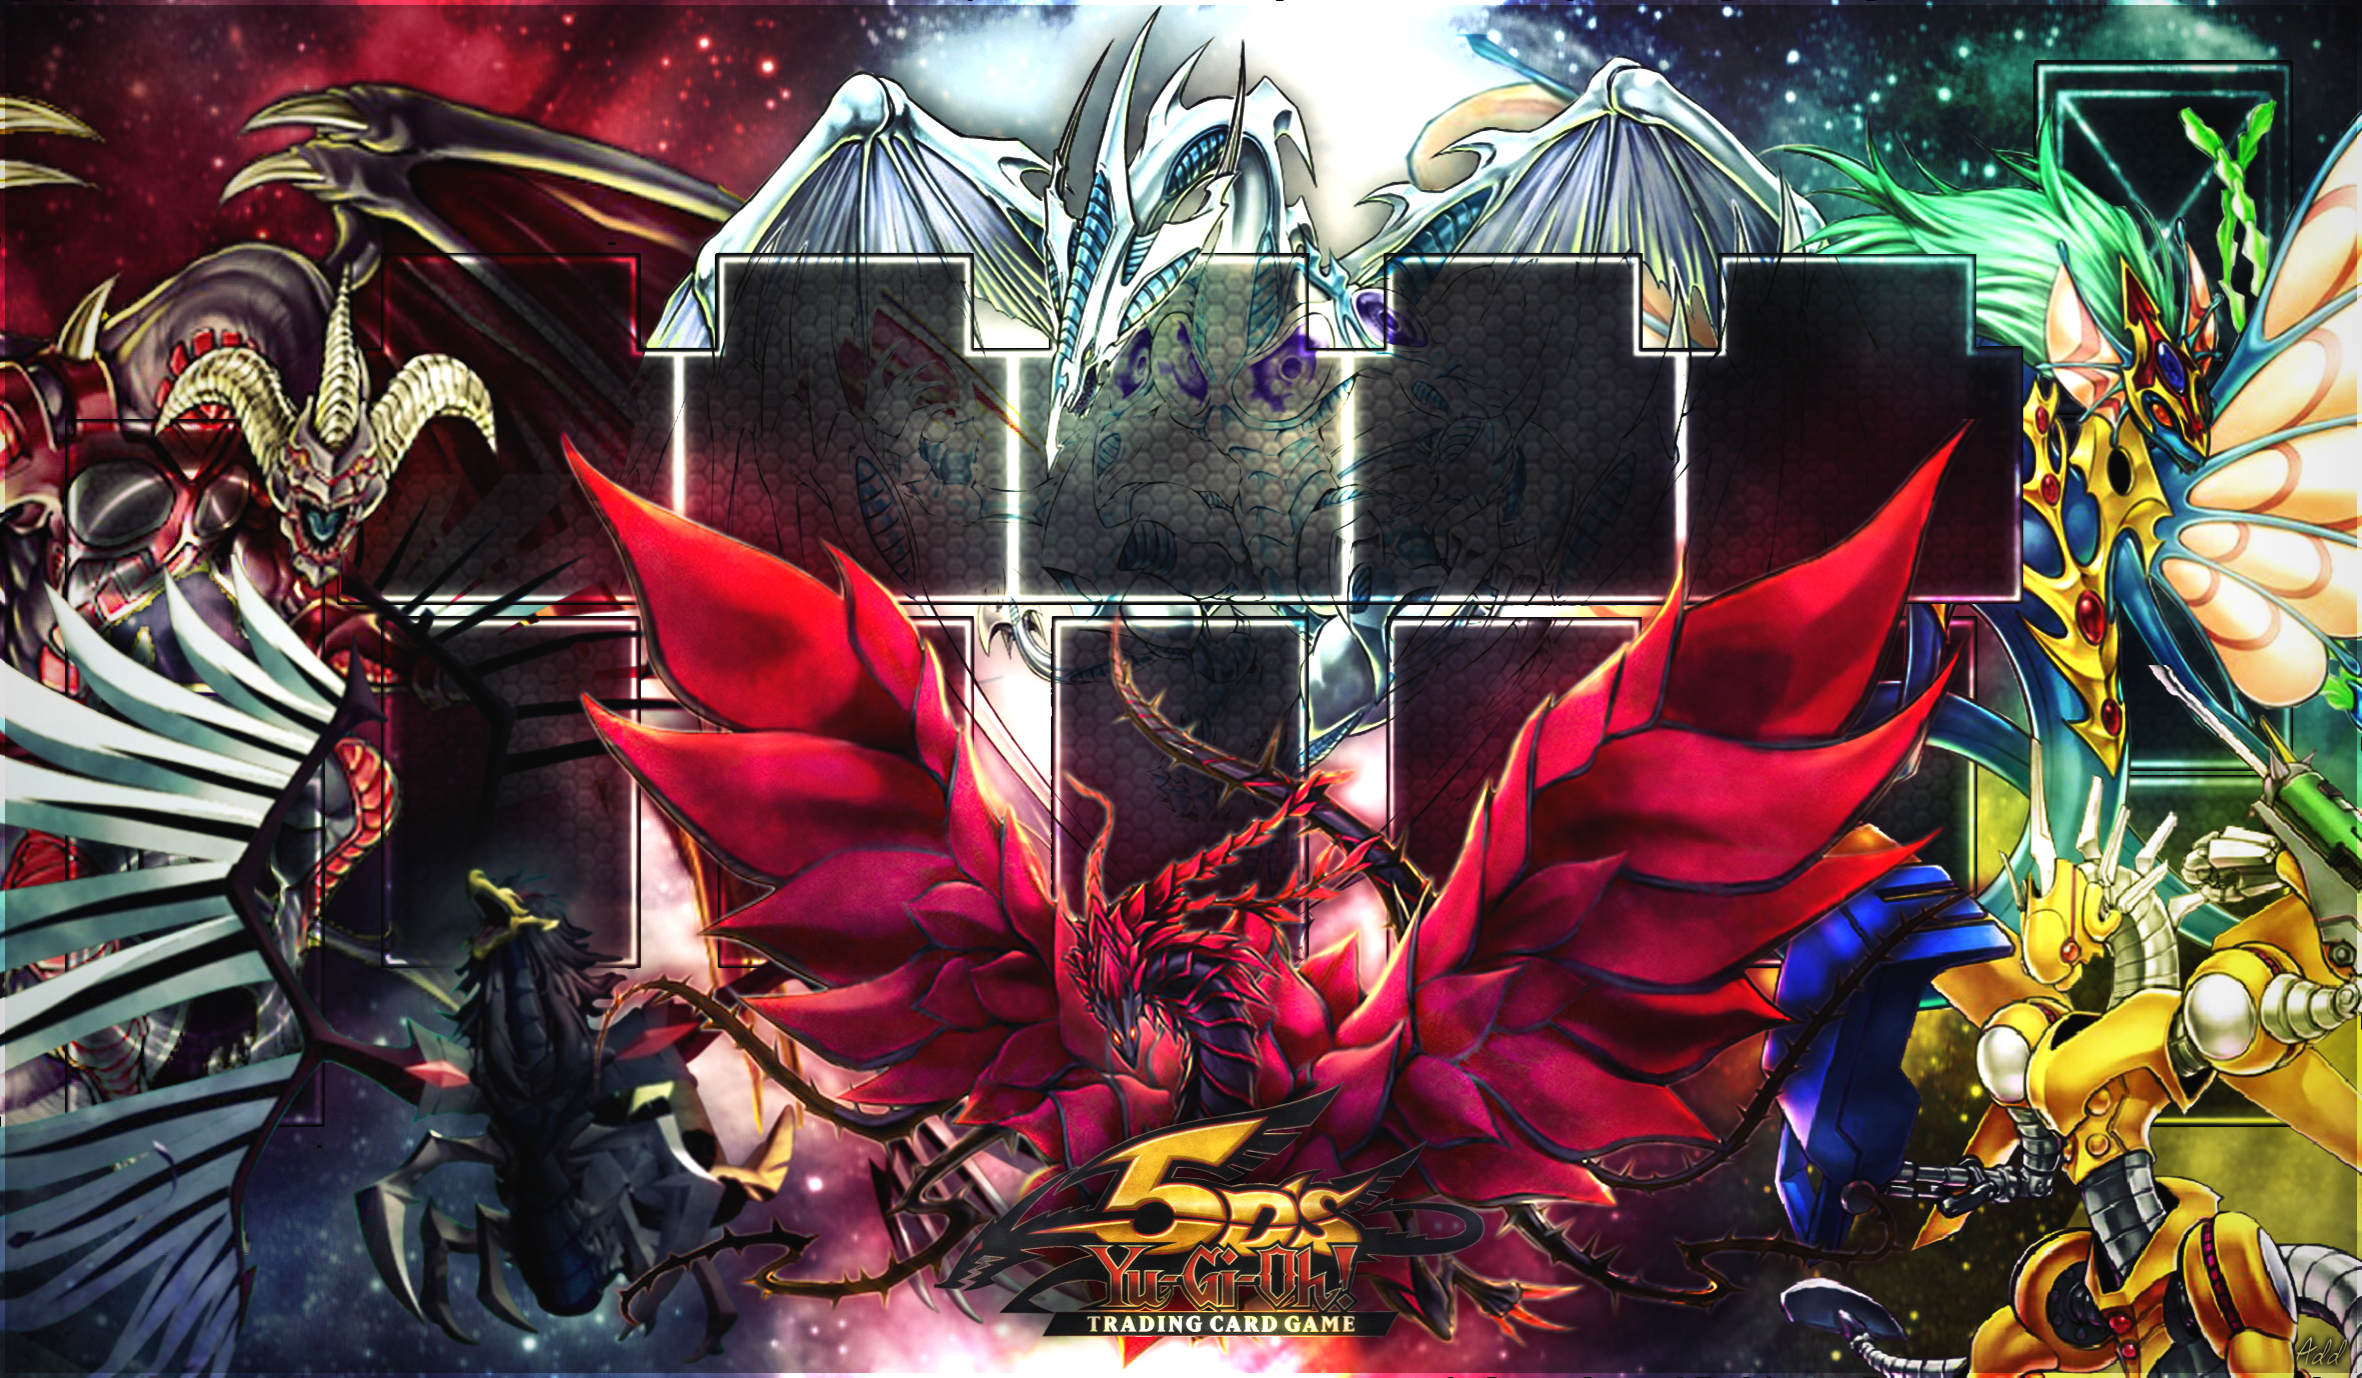 Yugioh - 5Ds Signature Dragons Playmat by SrAddiction on DeviantArt